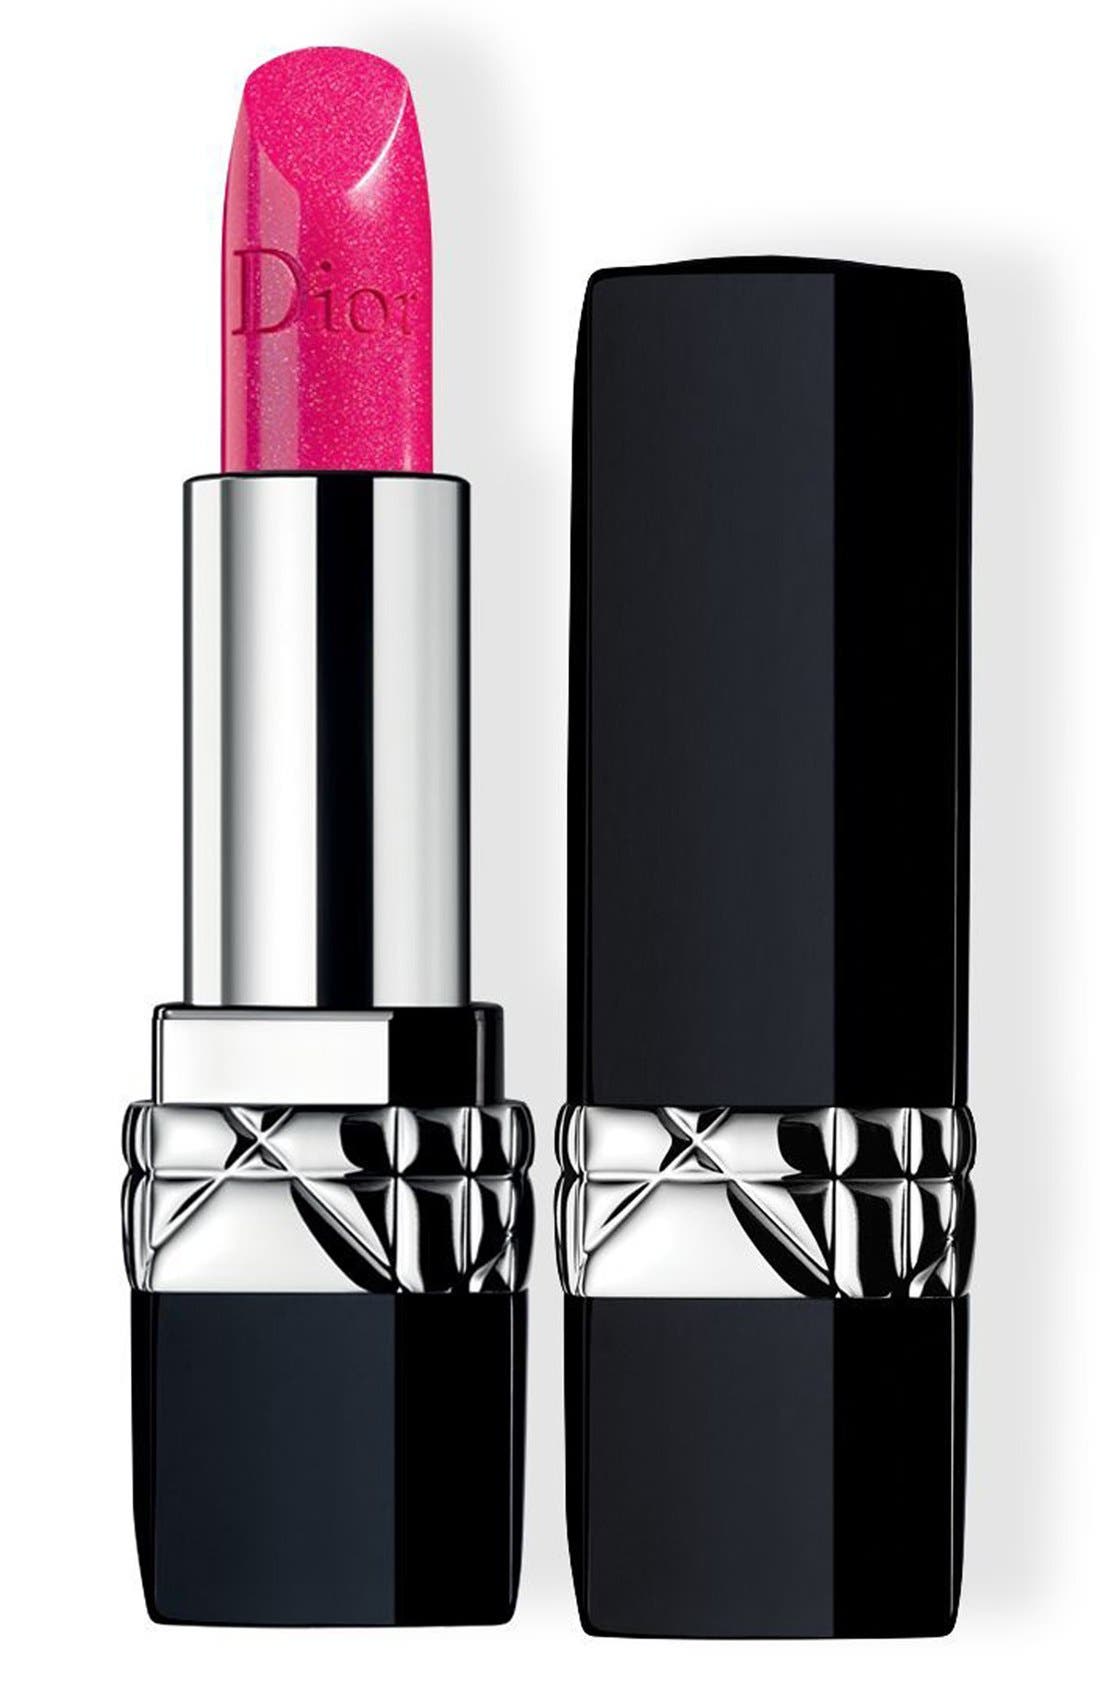 EAN 3348901312356 product image for Dior Couture Color Rouge Dior Lipstick - 047 Miss | upcitemdb.com